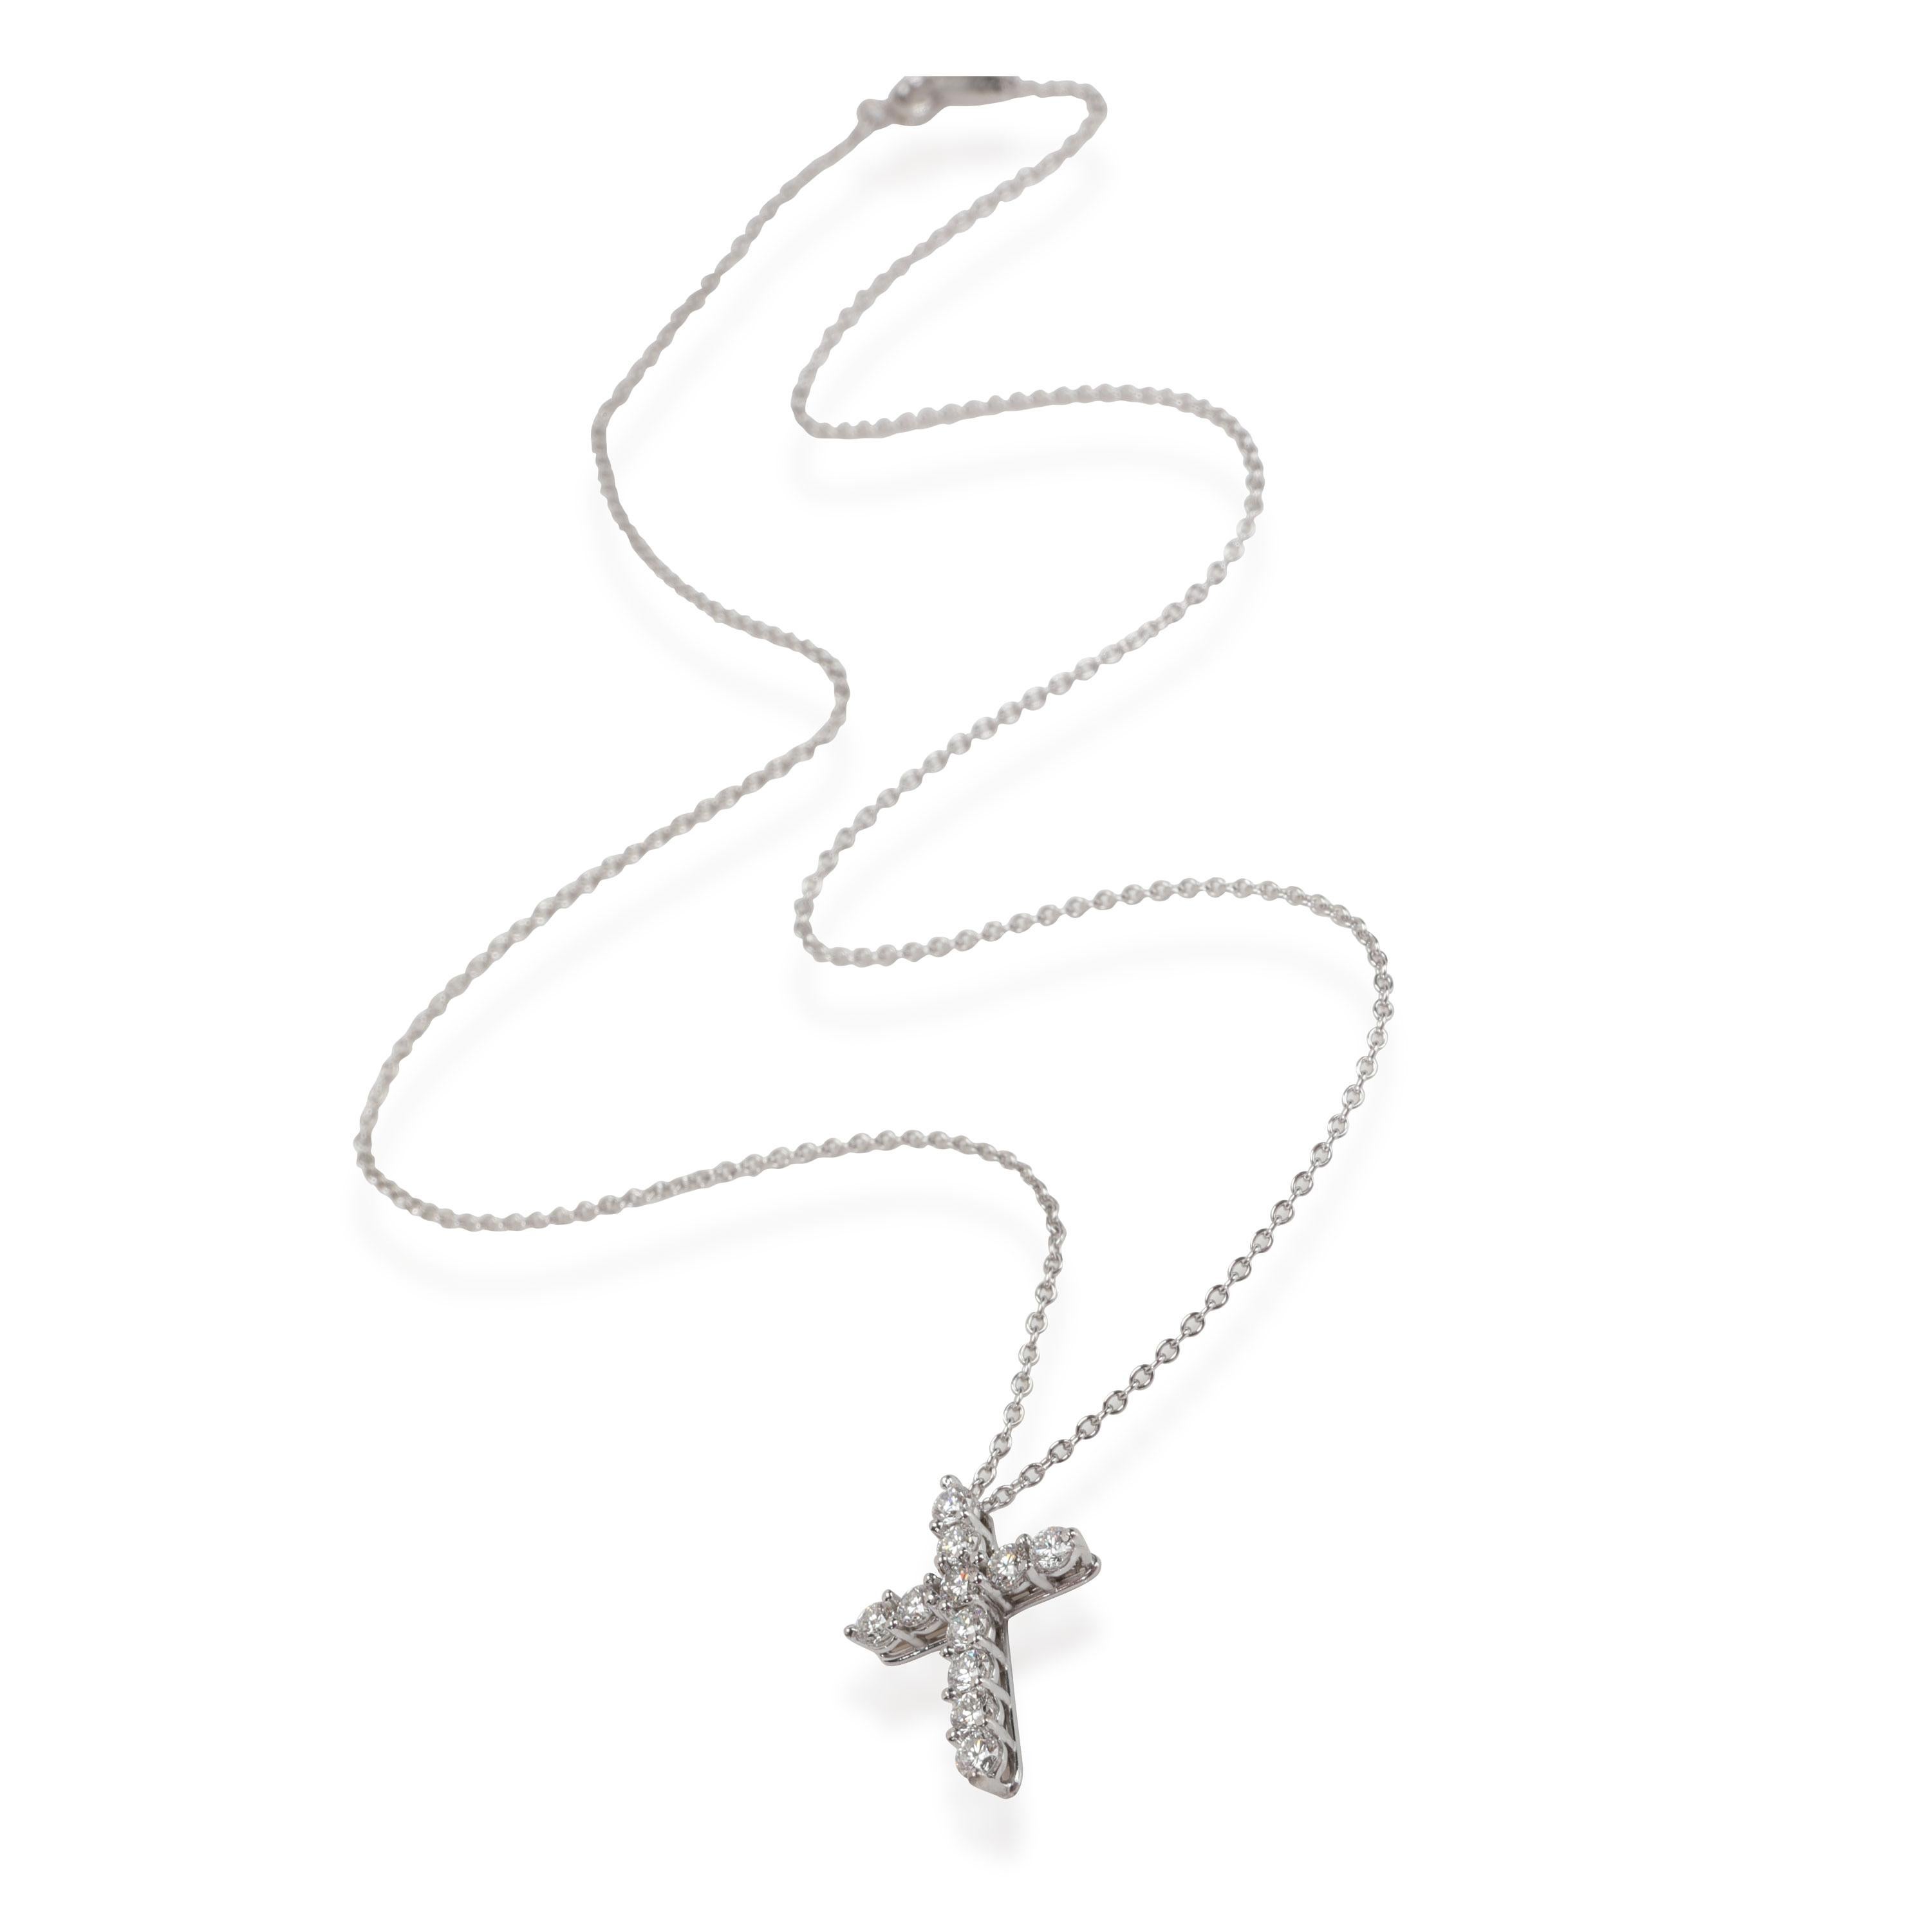 Tiffany & Co. Diamond Cross Pendant in Platinum 0.42 CTW

PRIMARY DETAILS
SKU: 113745
Listing Title: Tiffany & Co. Diamond Cross Pendant in Platinum 0.42 CTW
Condition Description: Length is pendant is 18 mm. Retails for USD 3,200.
Brand: Tiffany &